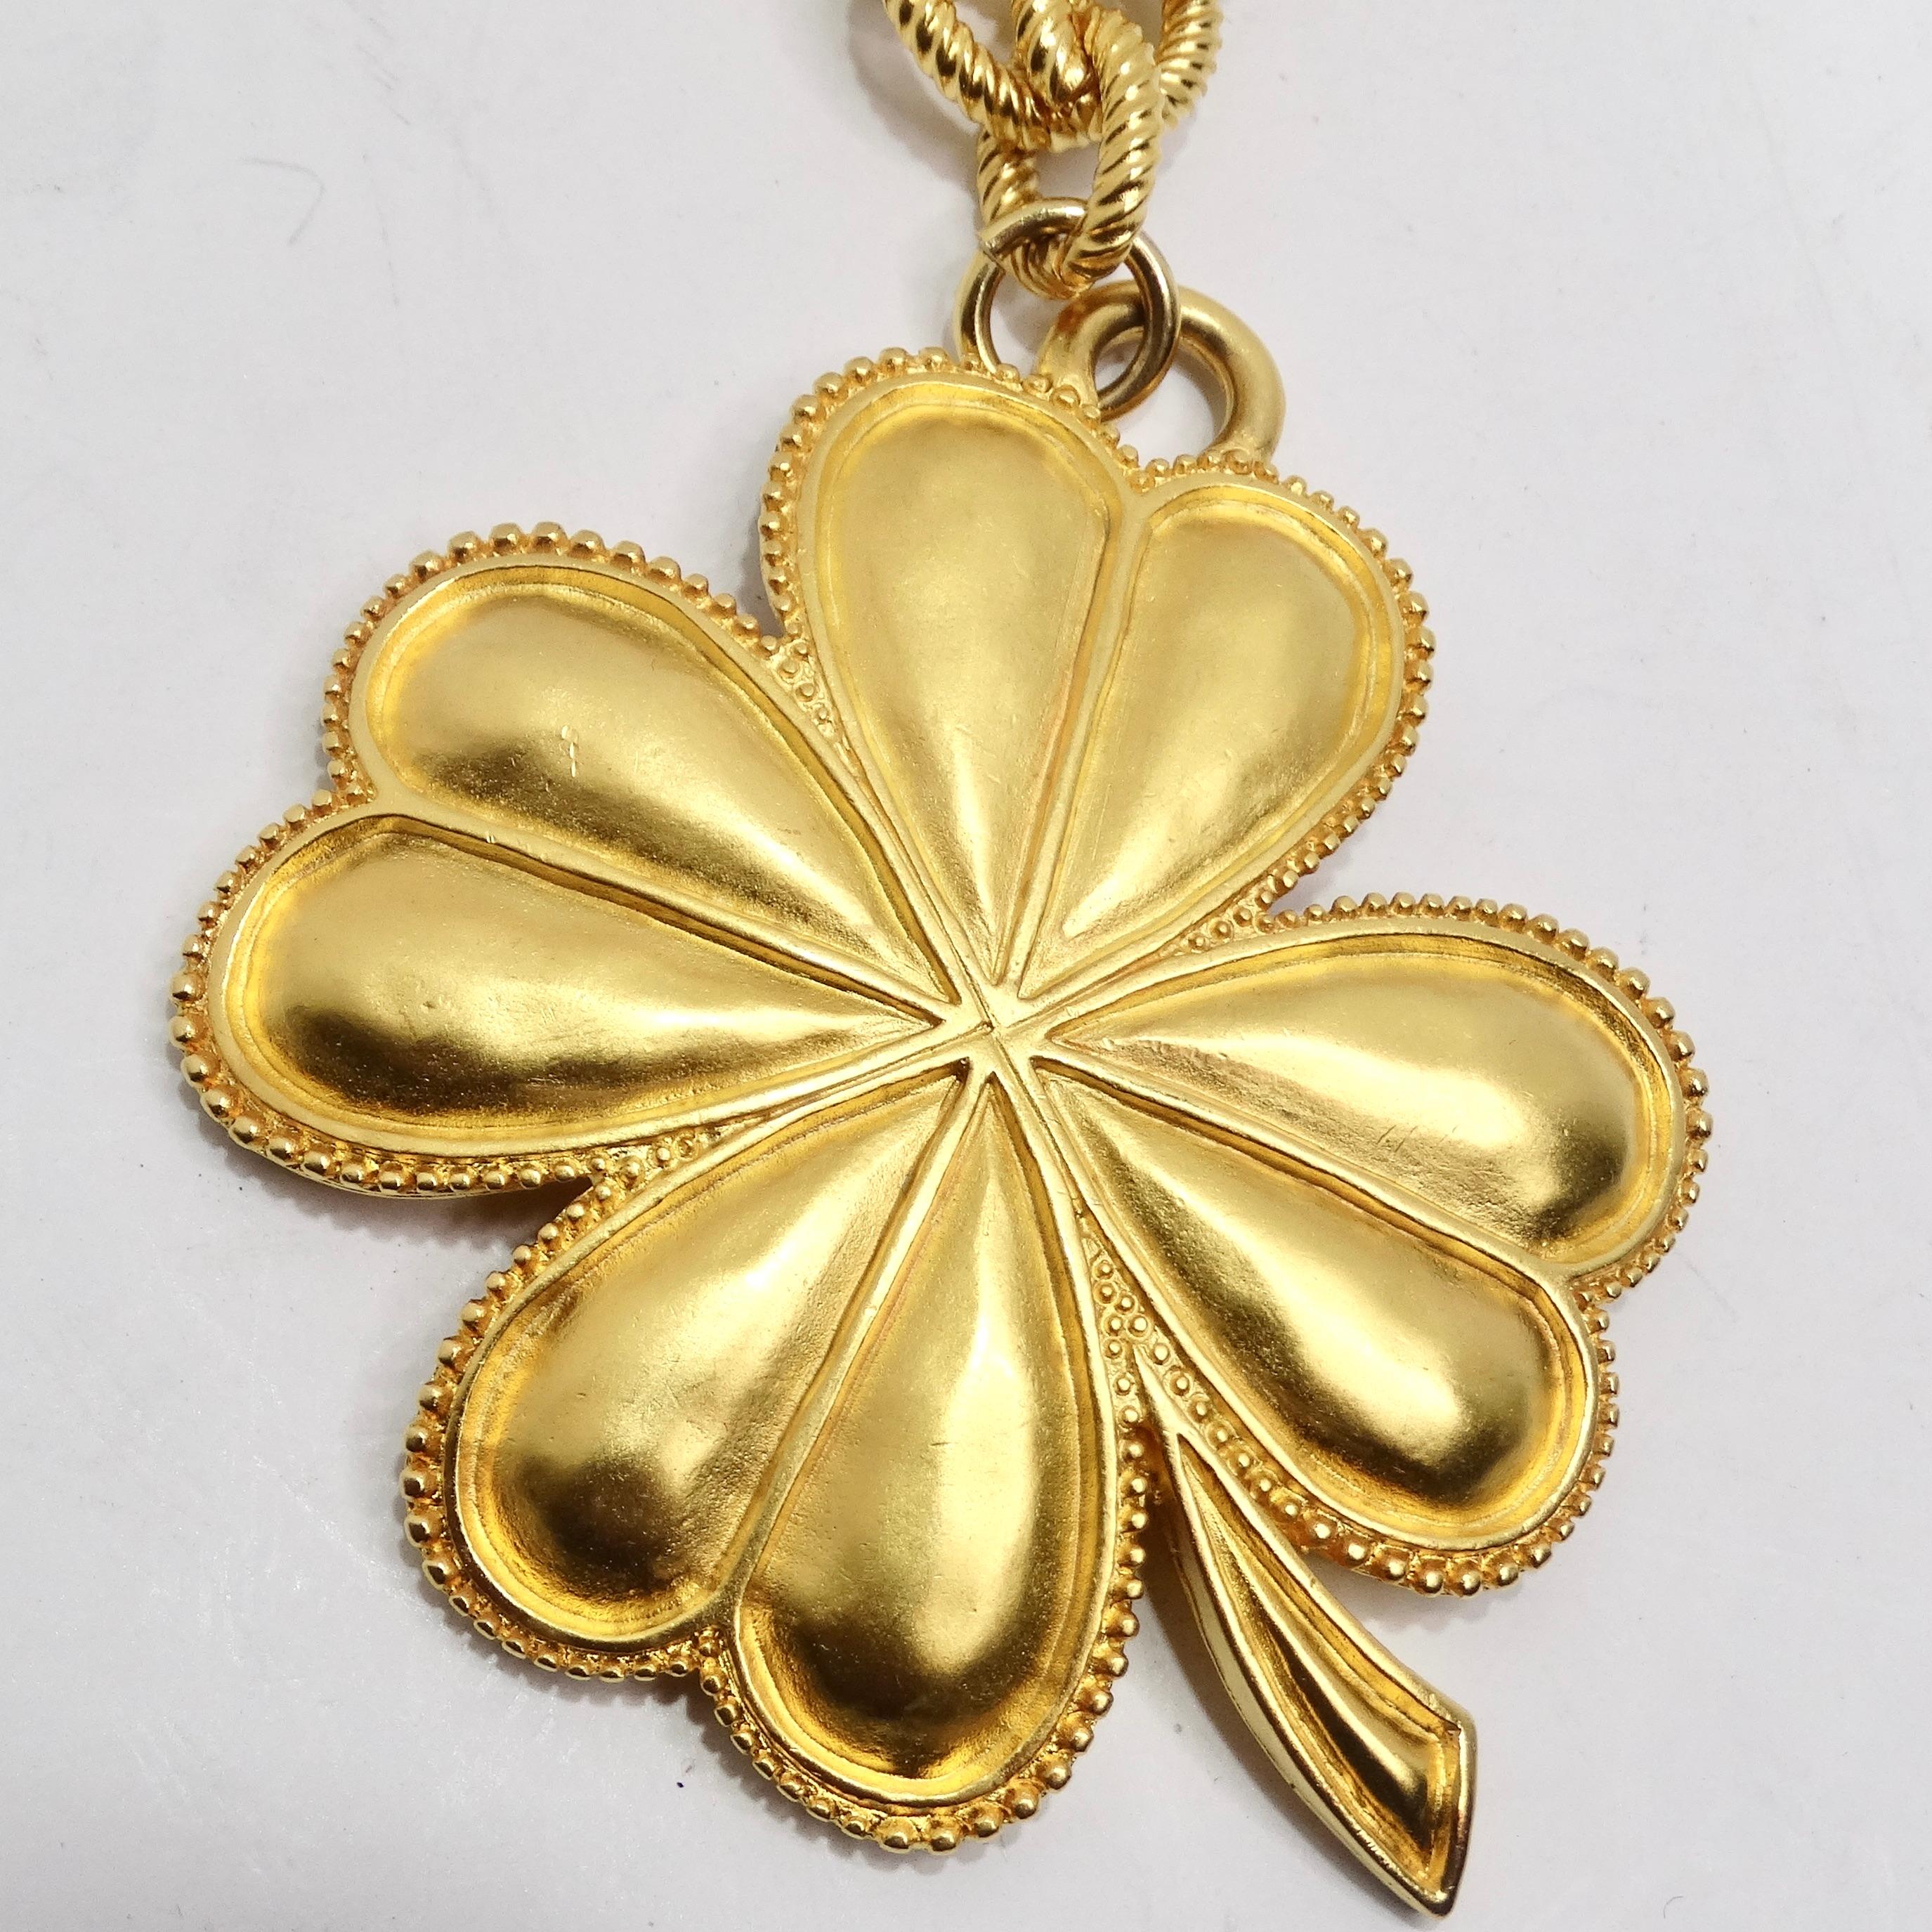 Karl Lagerfeld 1980s Gold Plated Shamrock Pendent Necklace In Excellent Condition For Sale In Scottsdale, AZ